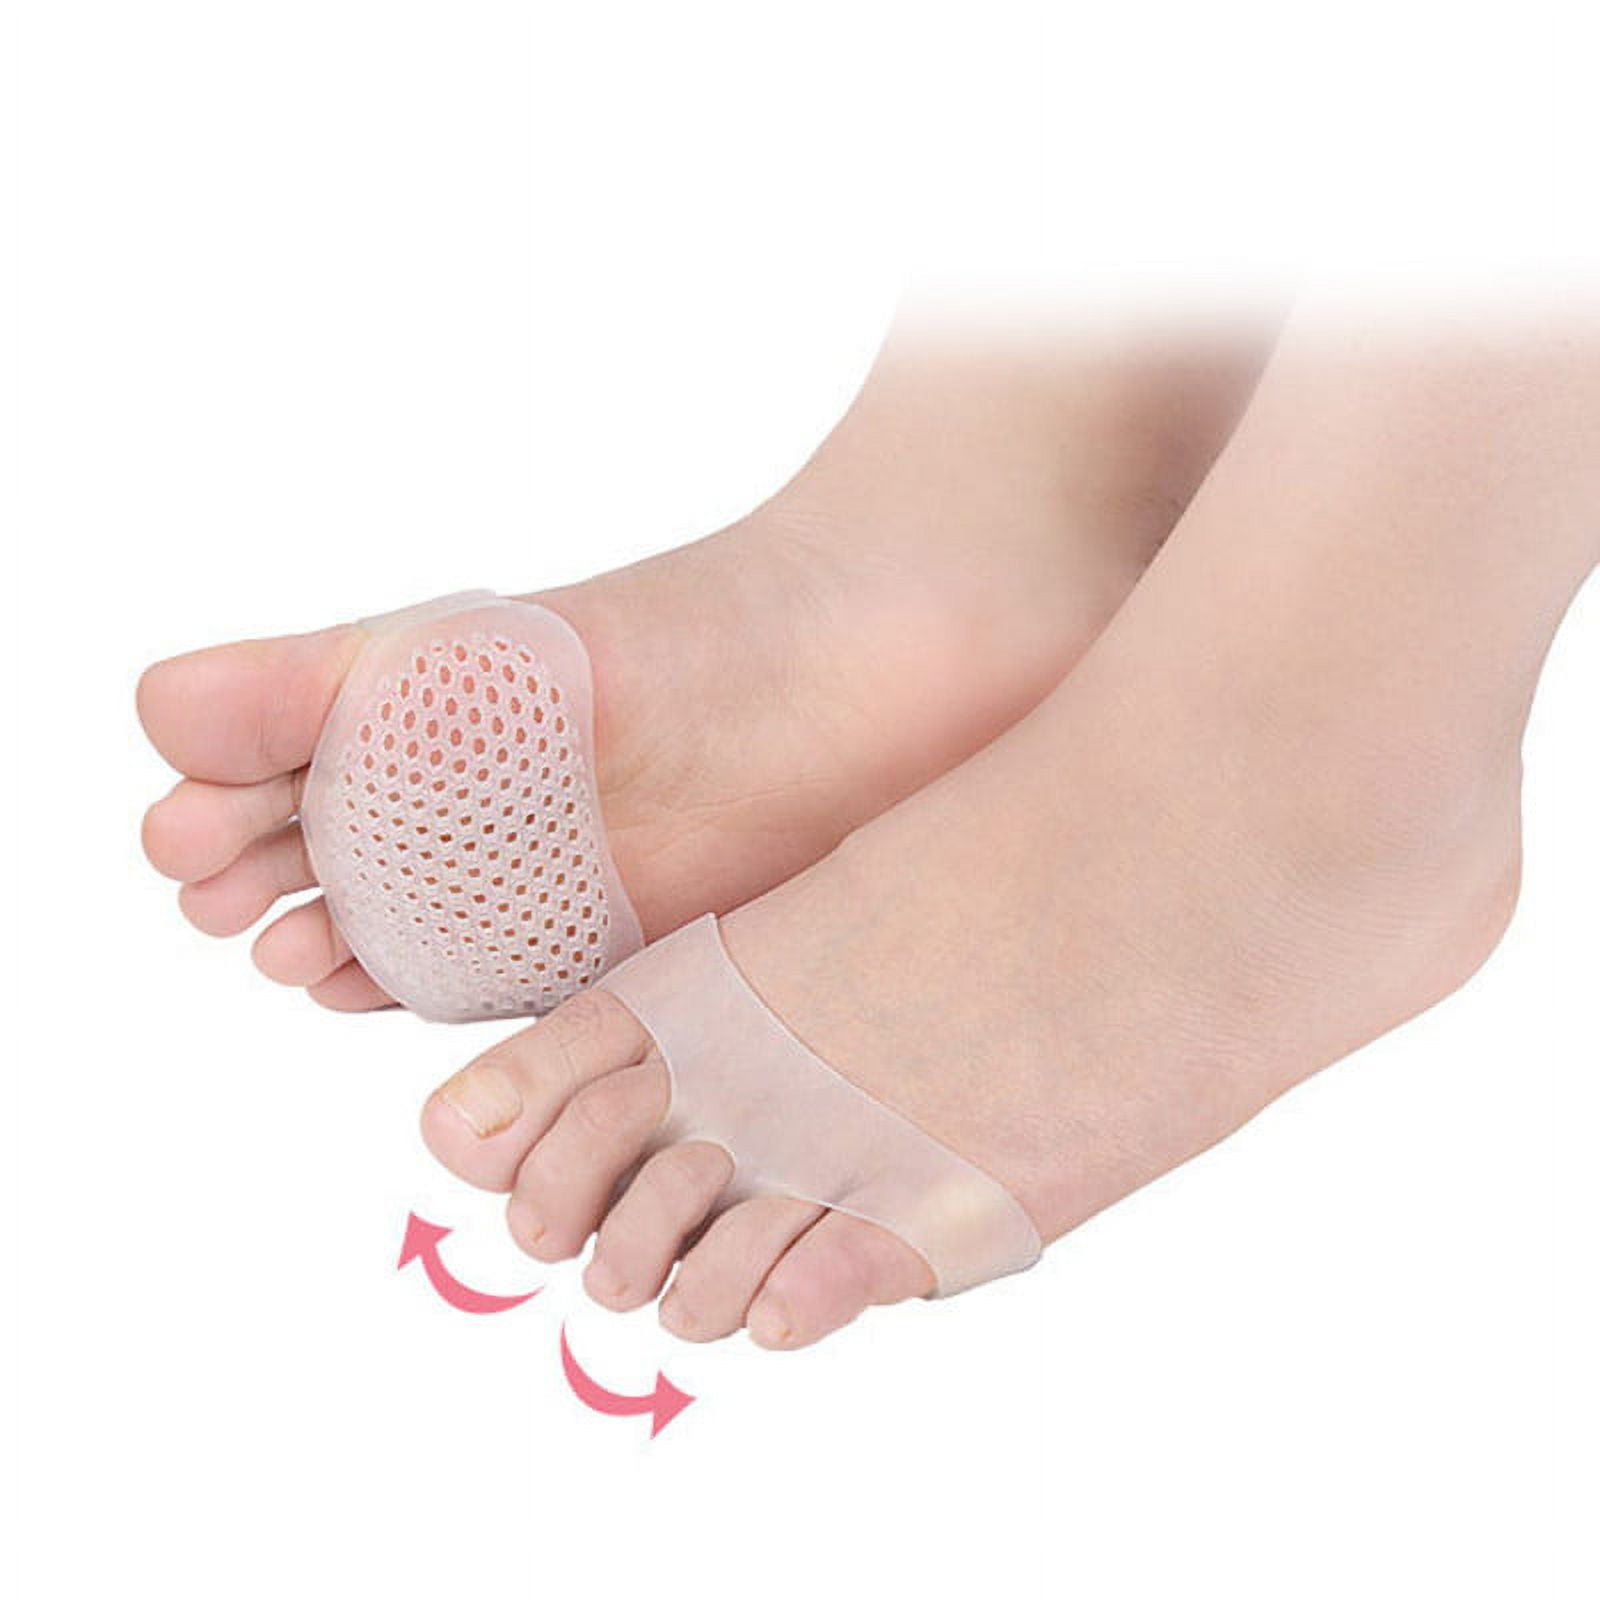 ZenToes Metatarsal Felt Pads - 6 Pair Pack - Contoured Adhesive Ball of Foot Cushions - Adhere to Shoe Insoles or Feet